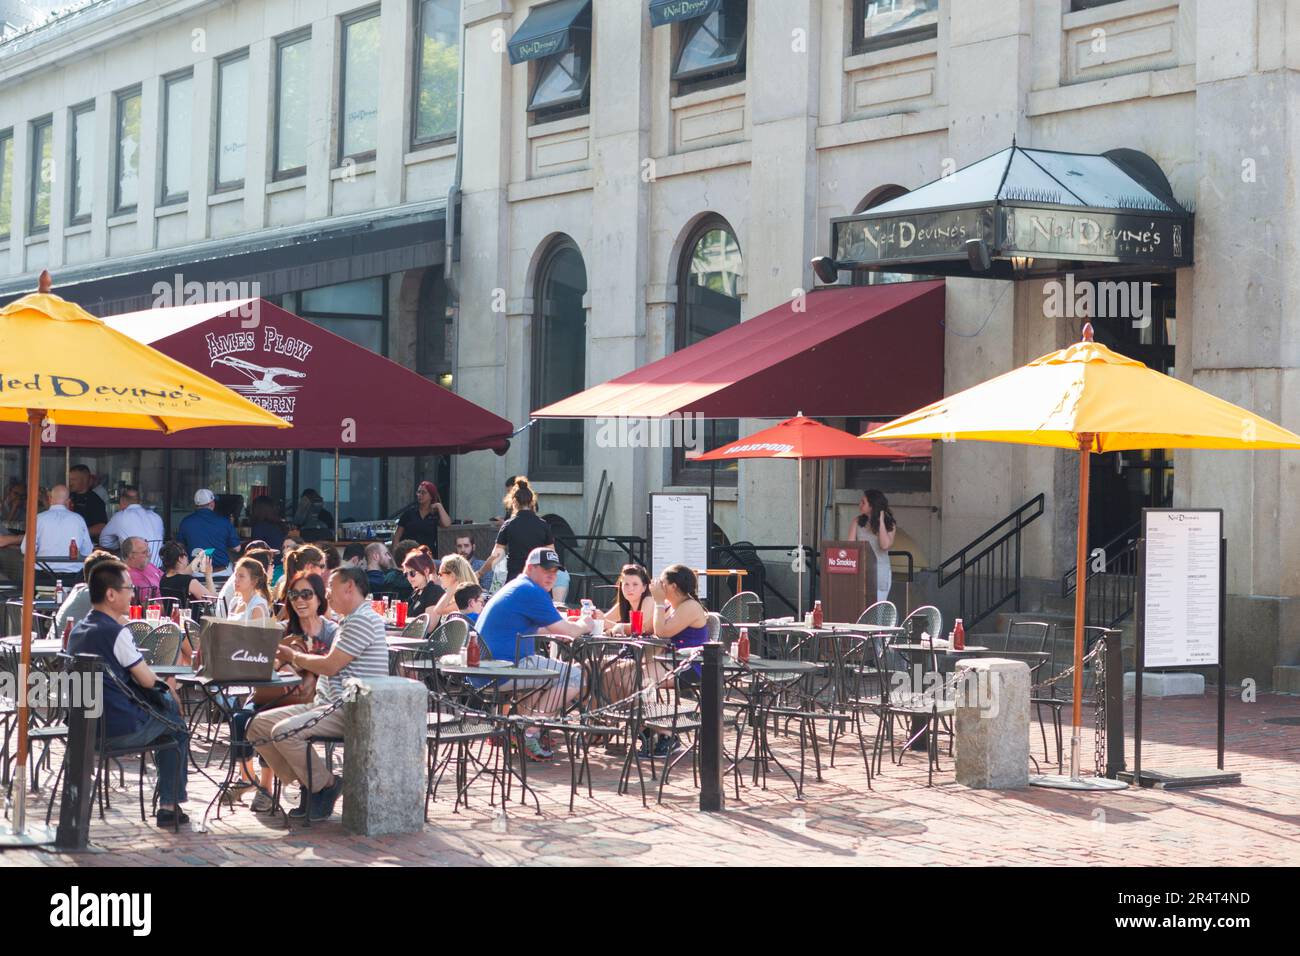 USA, Massachusetts, Boston, Locals eating at food stalls outside Quincy Market Hall. Stock Photo